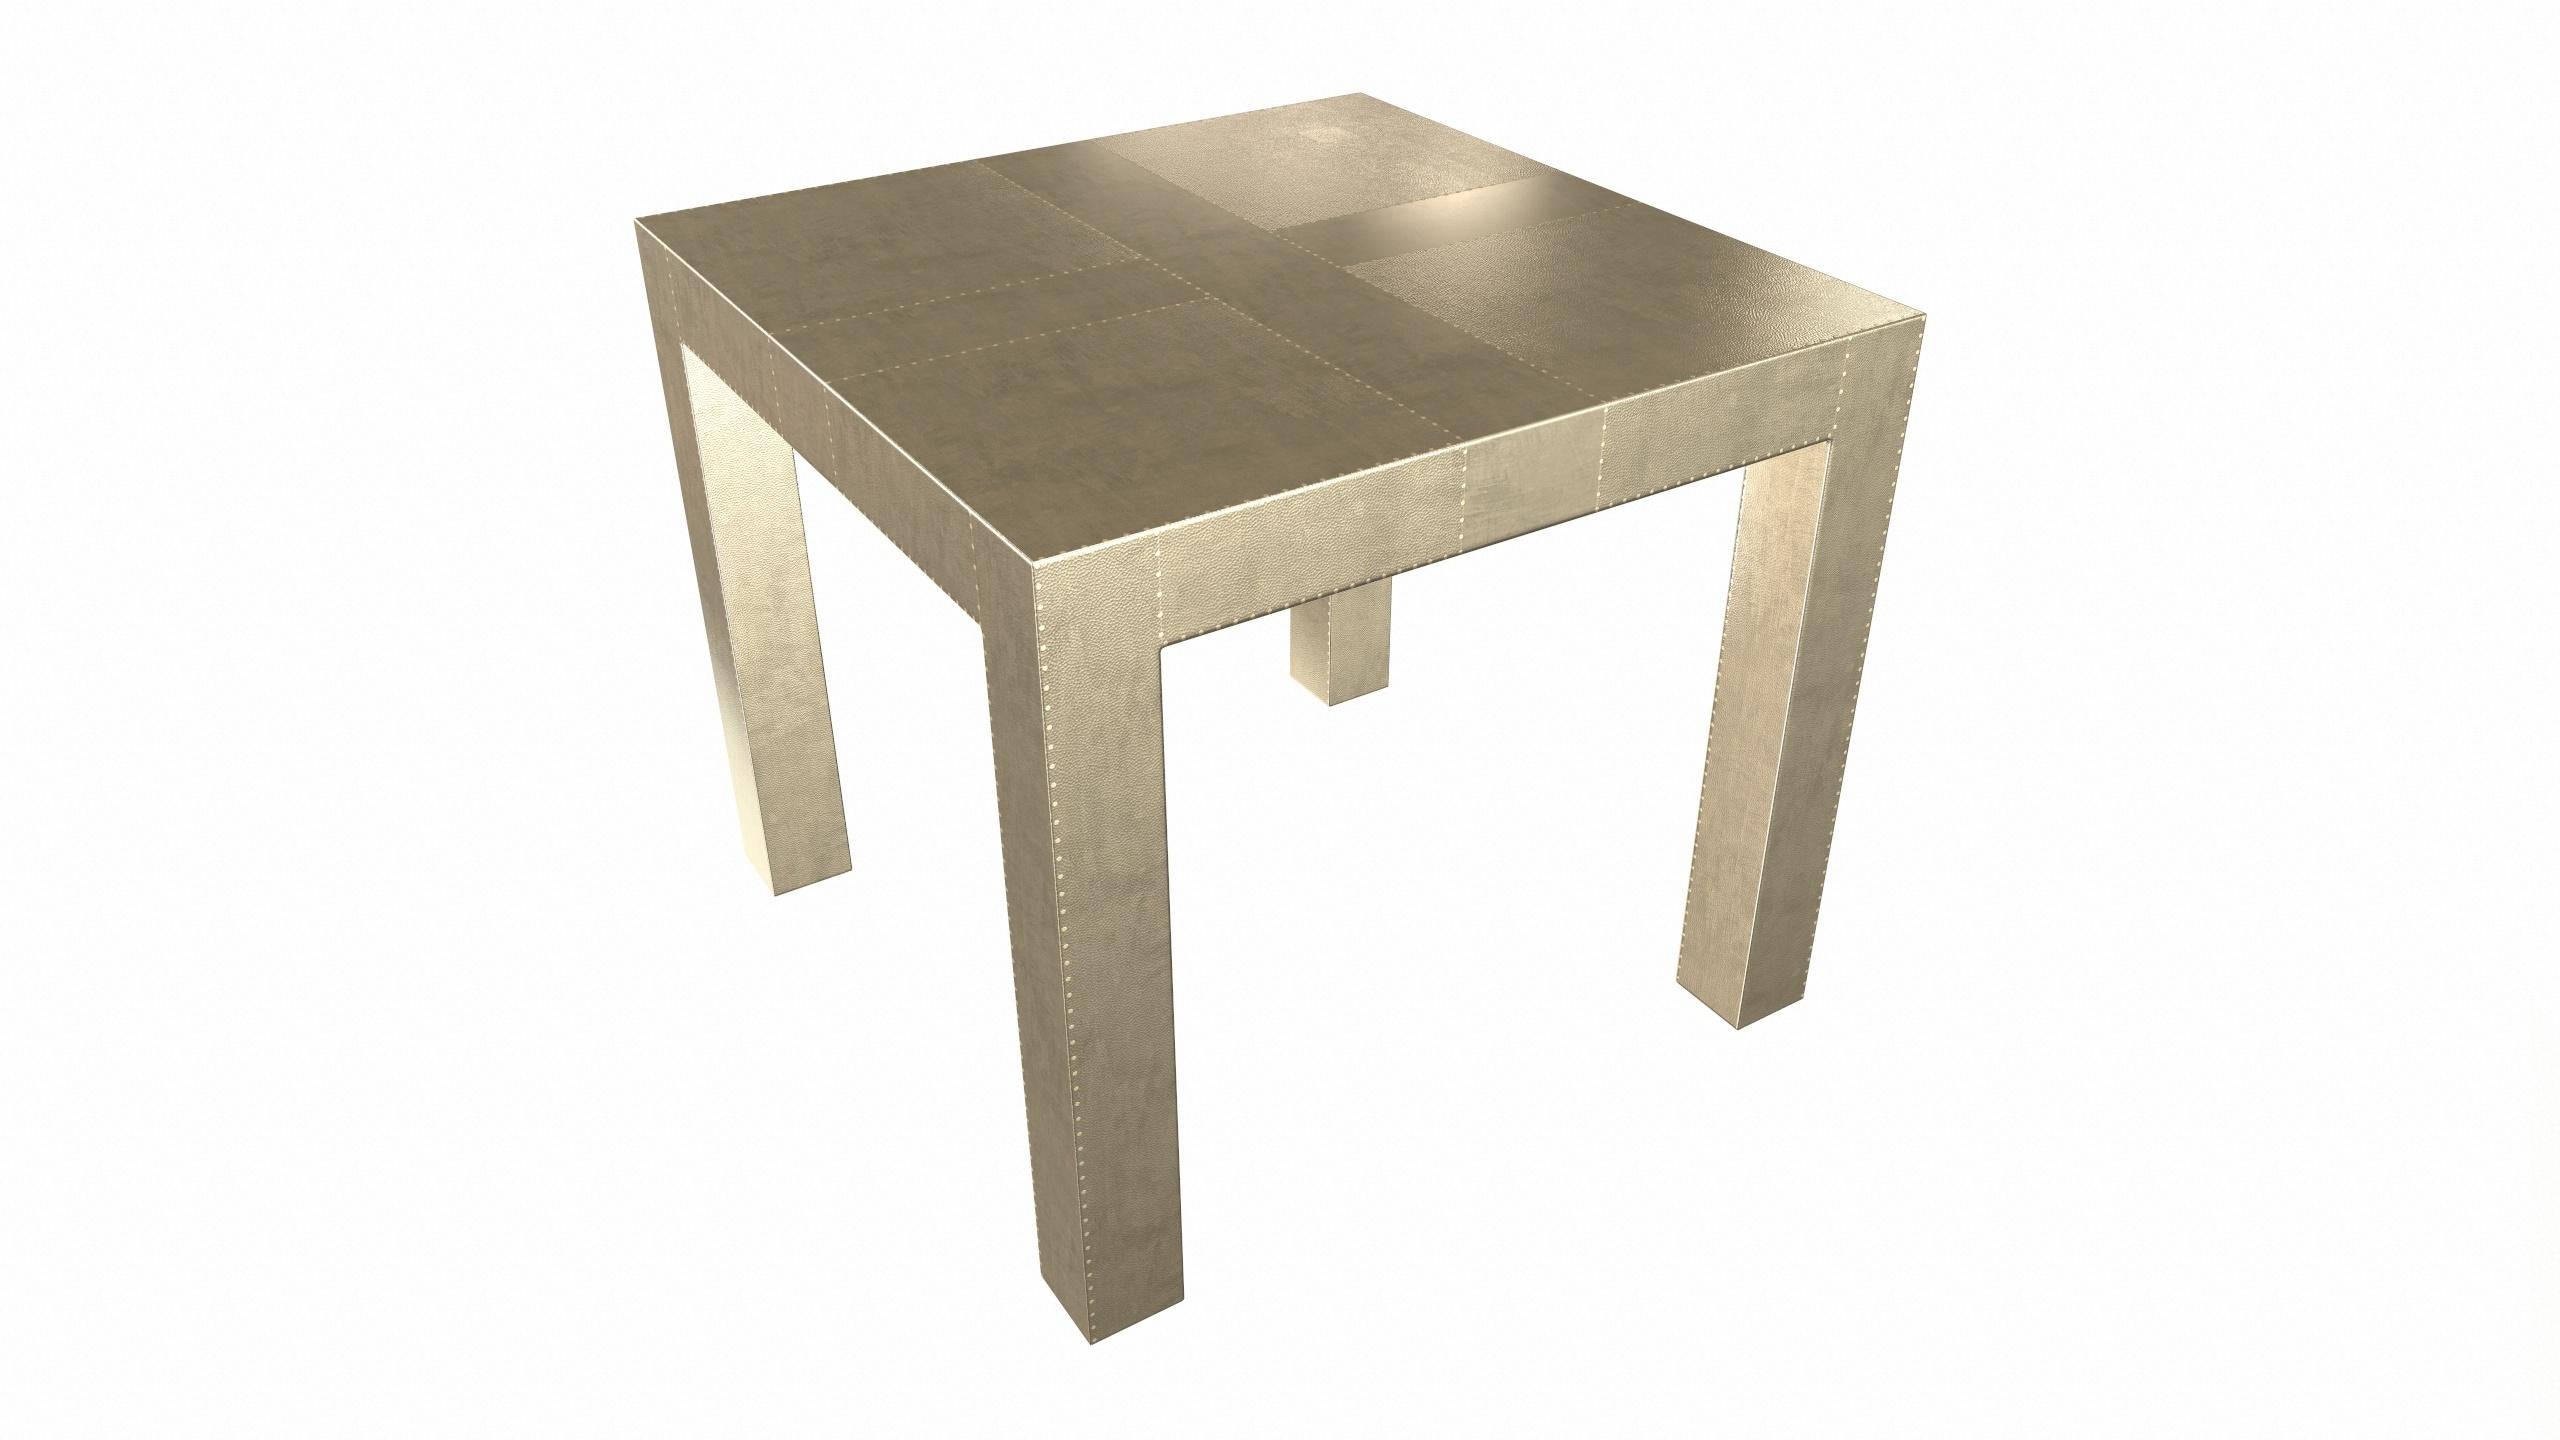 American Art Deco Square Drink Center Tables Mid. Hammered Brass by Alison Spear  For Sale